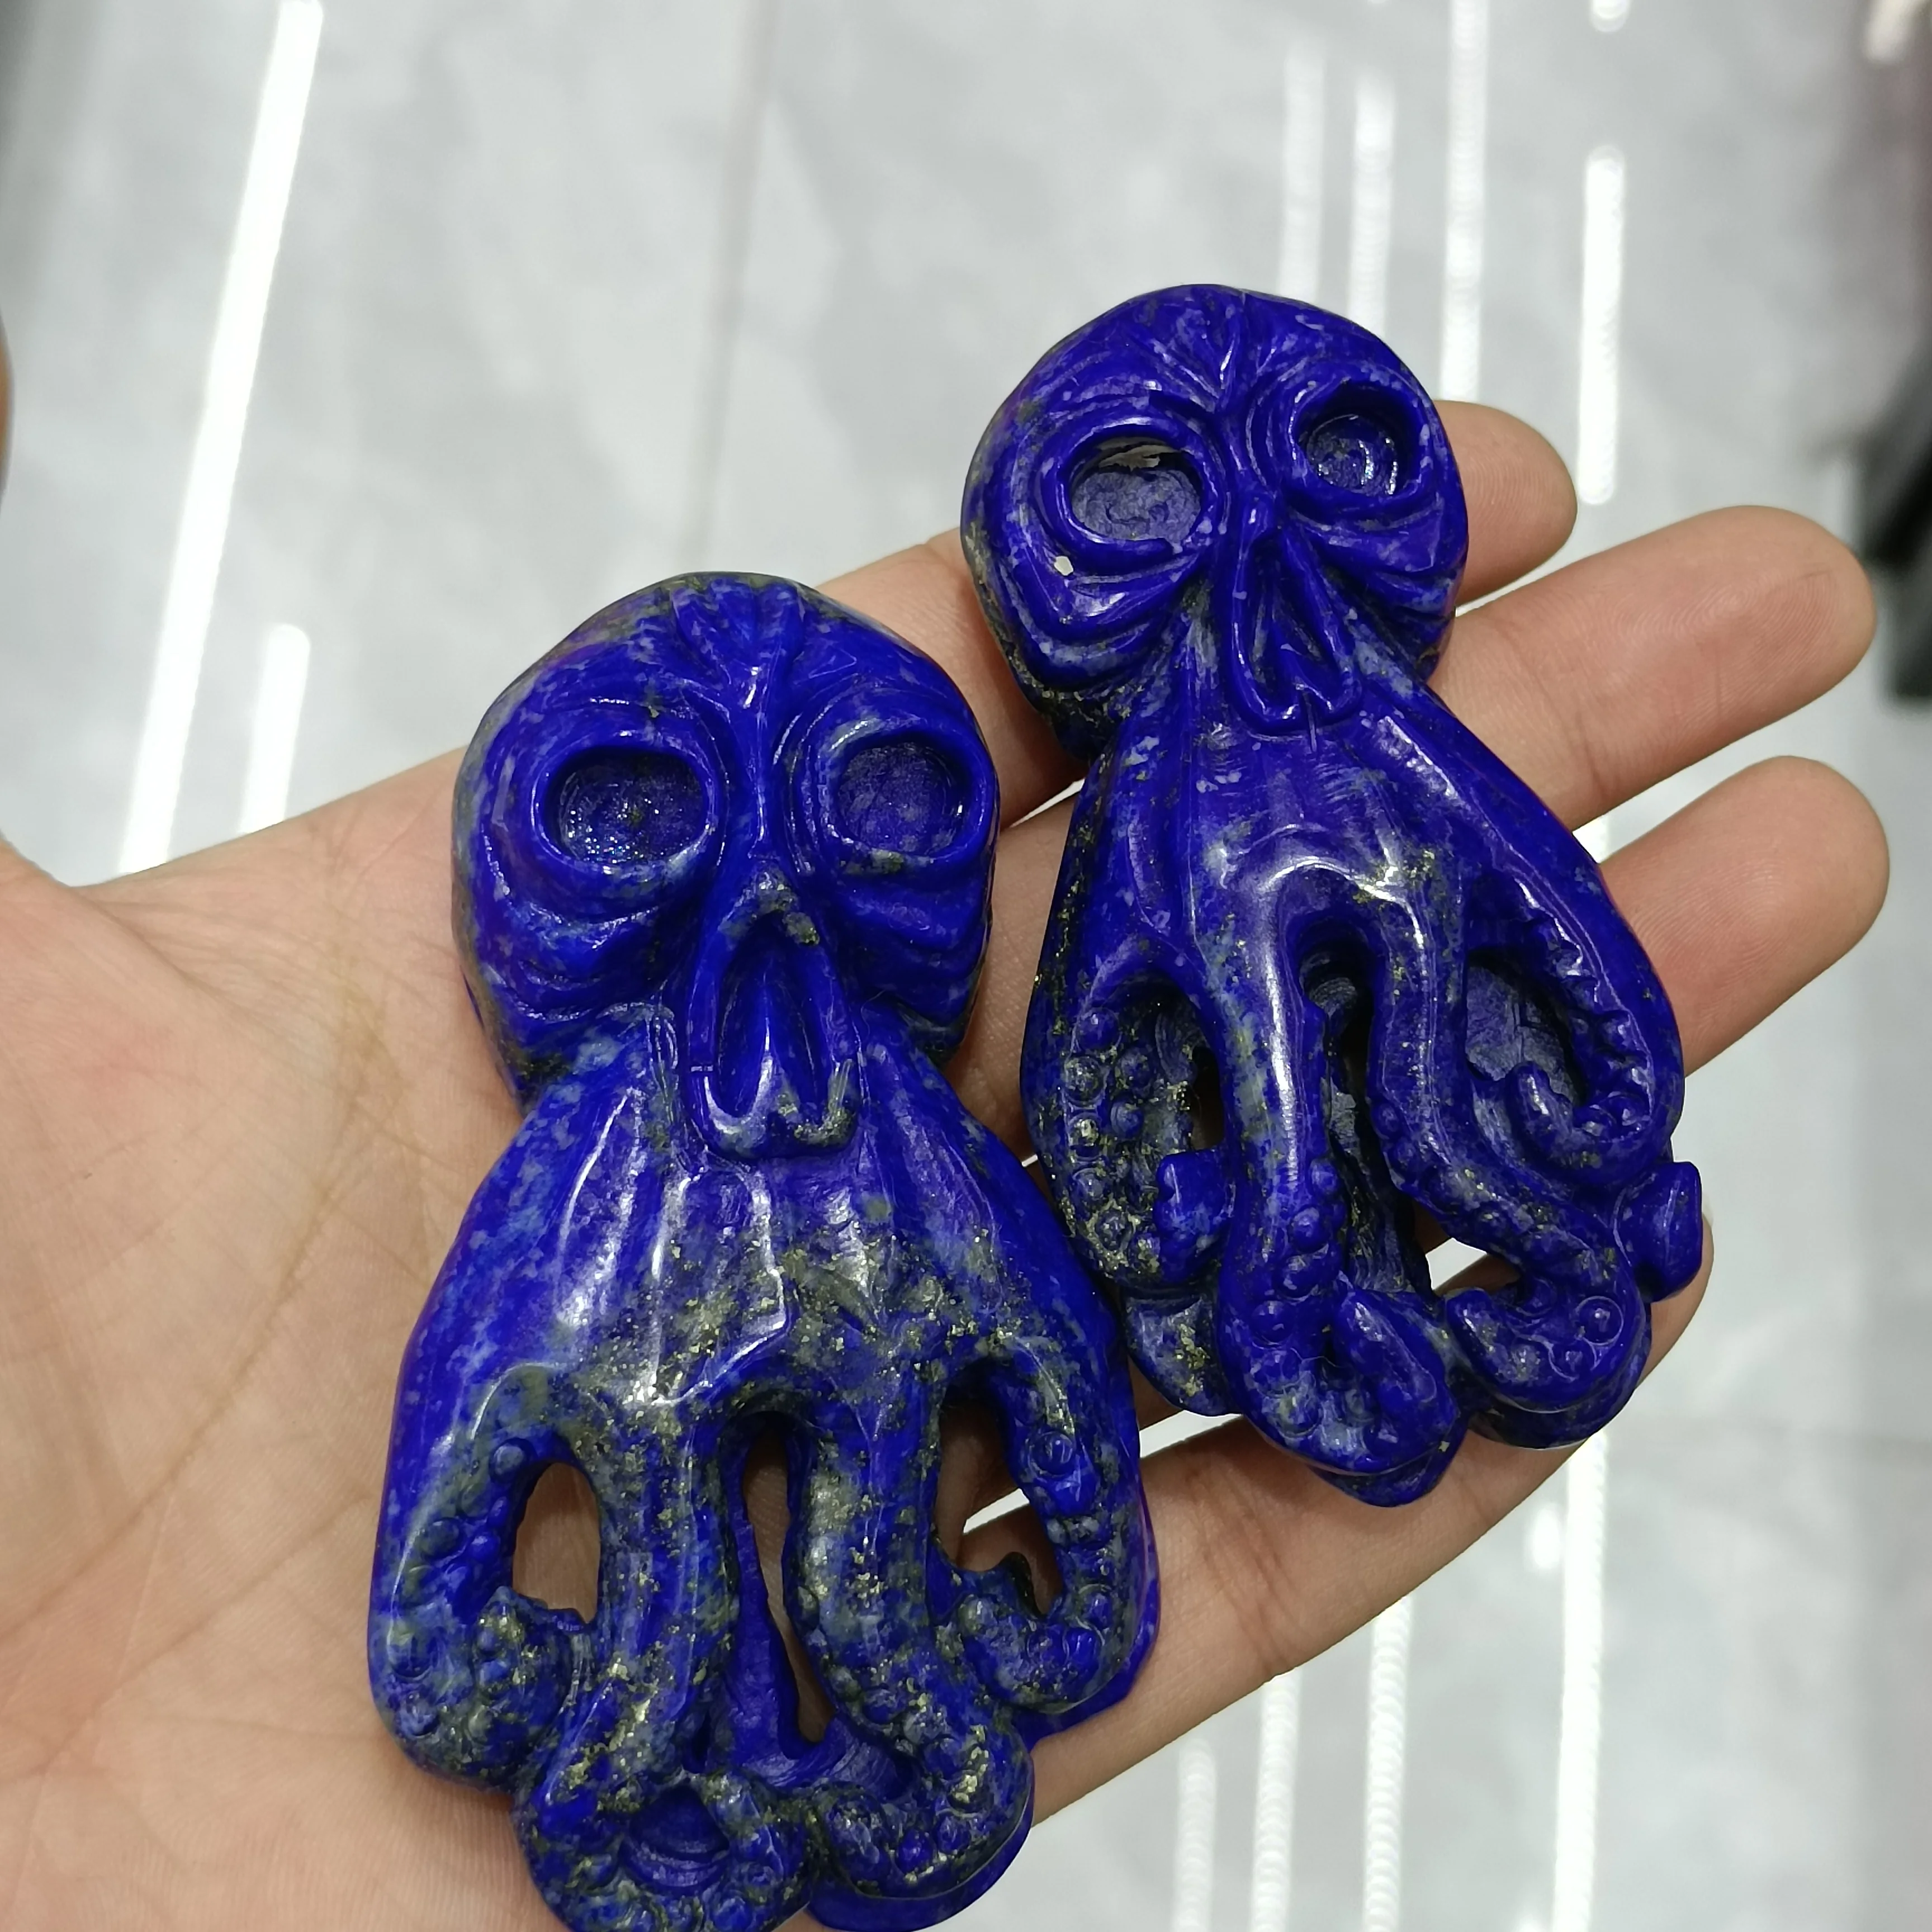 

7-8cm 1pc Natural Lapis lazuli Crystals Carving Statues Octopus Healing Reiki Sculptures Home Decoration Gift